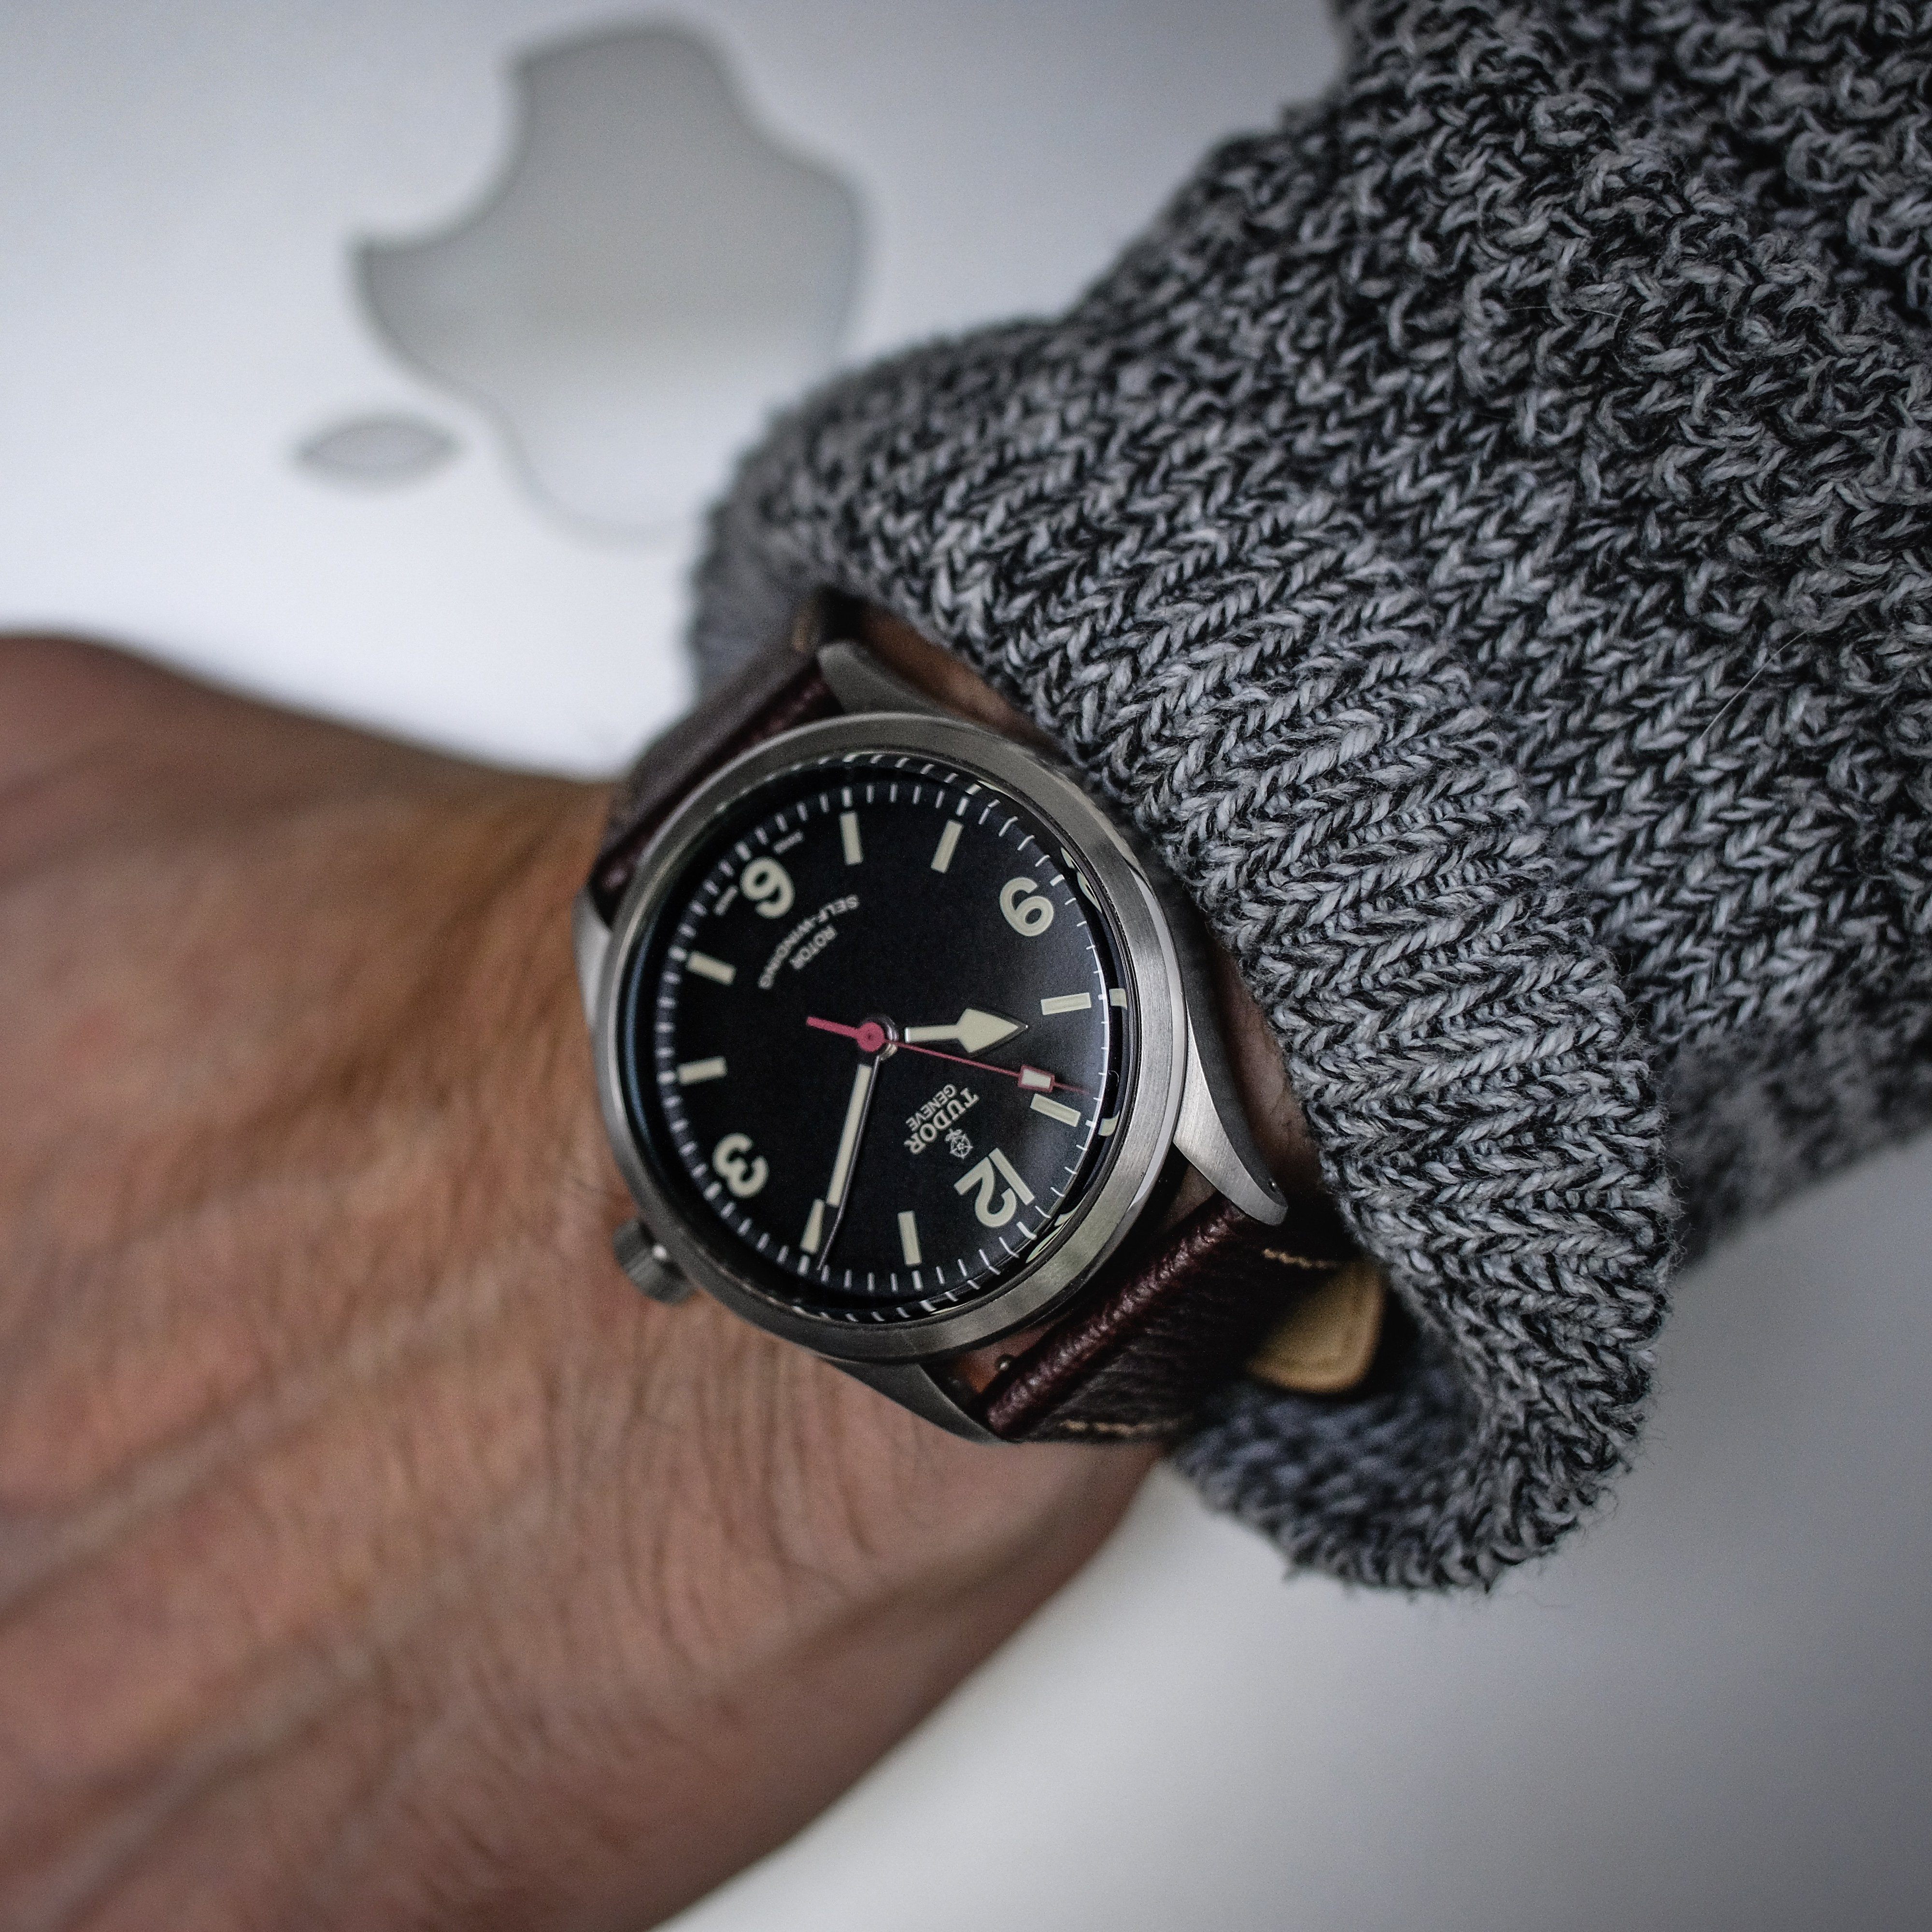 Check out this Tudor on our Italian leather watch strap. Photo by #varioeveryday member @jwit94